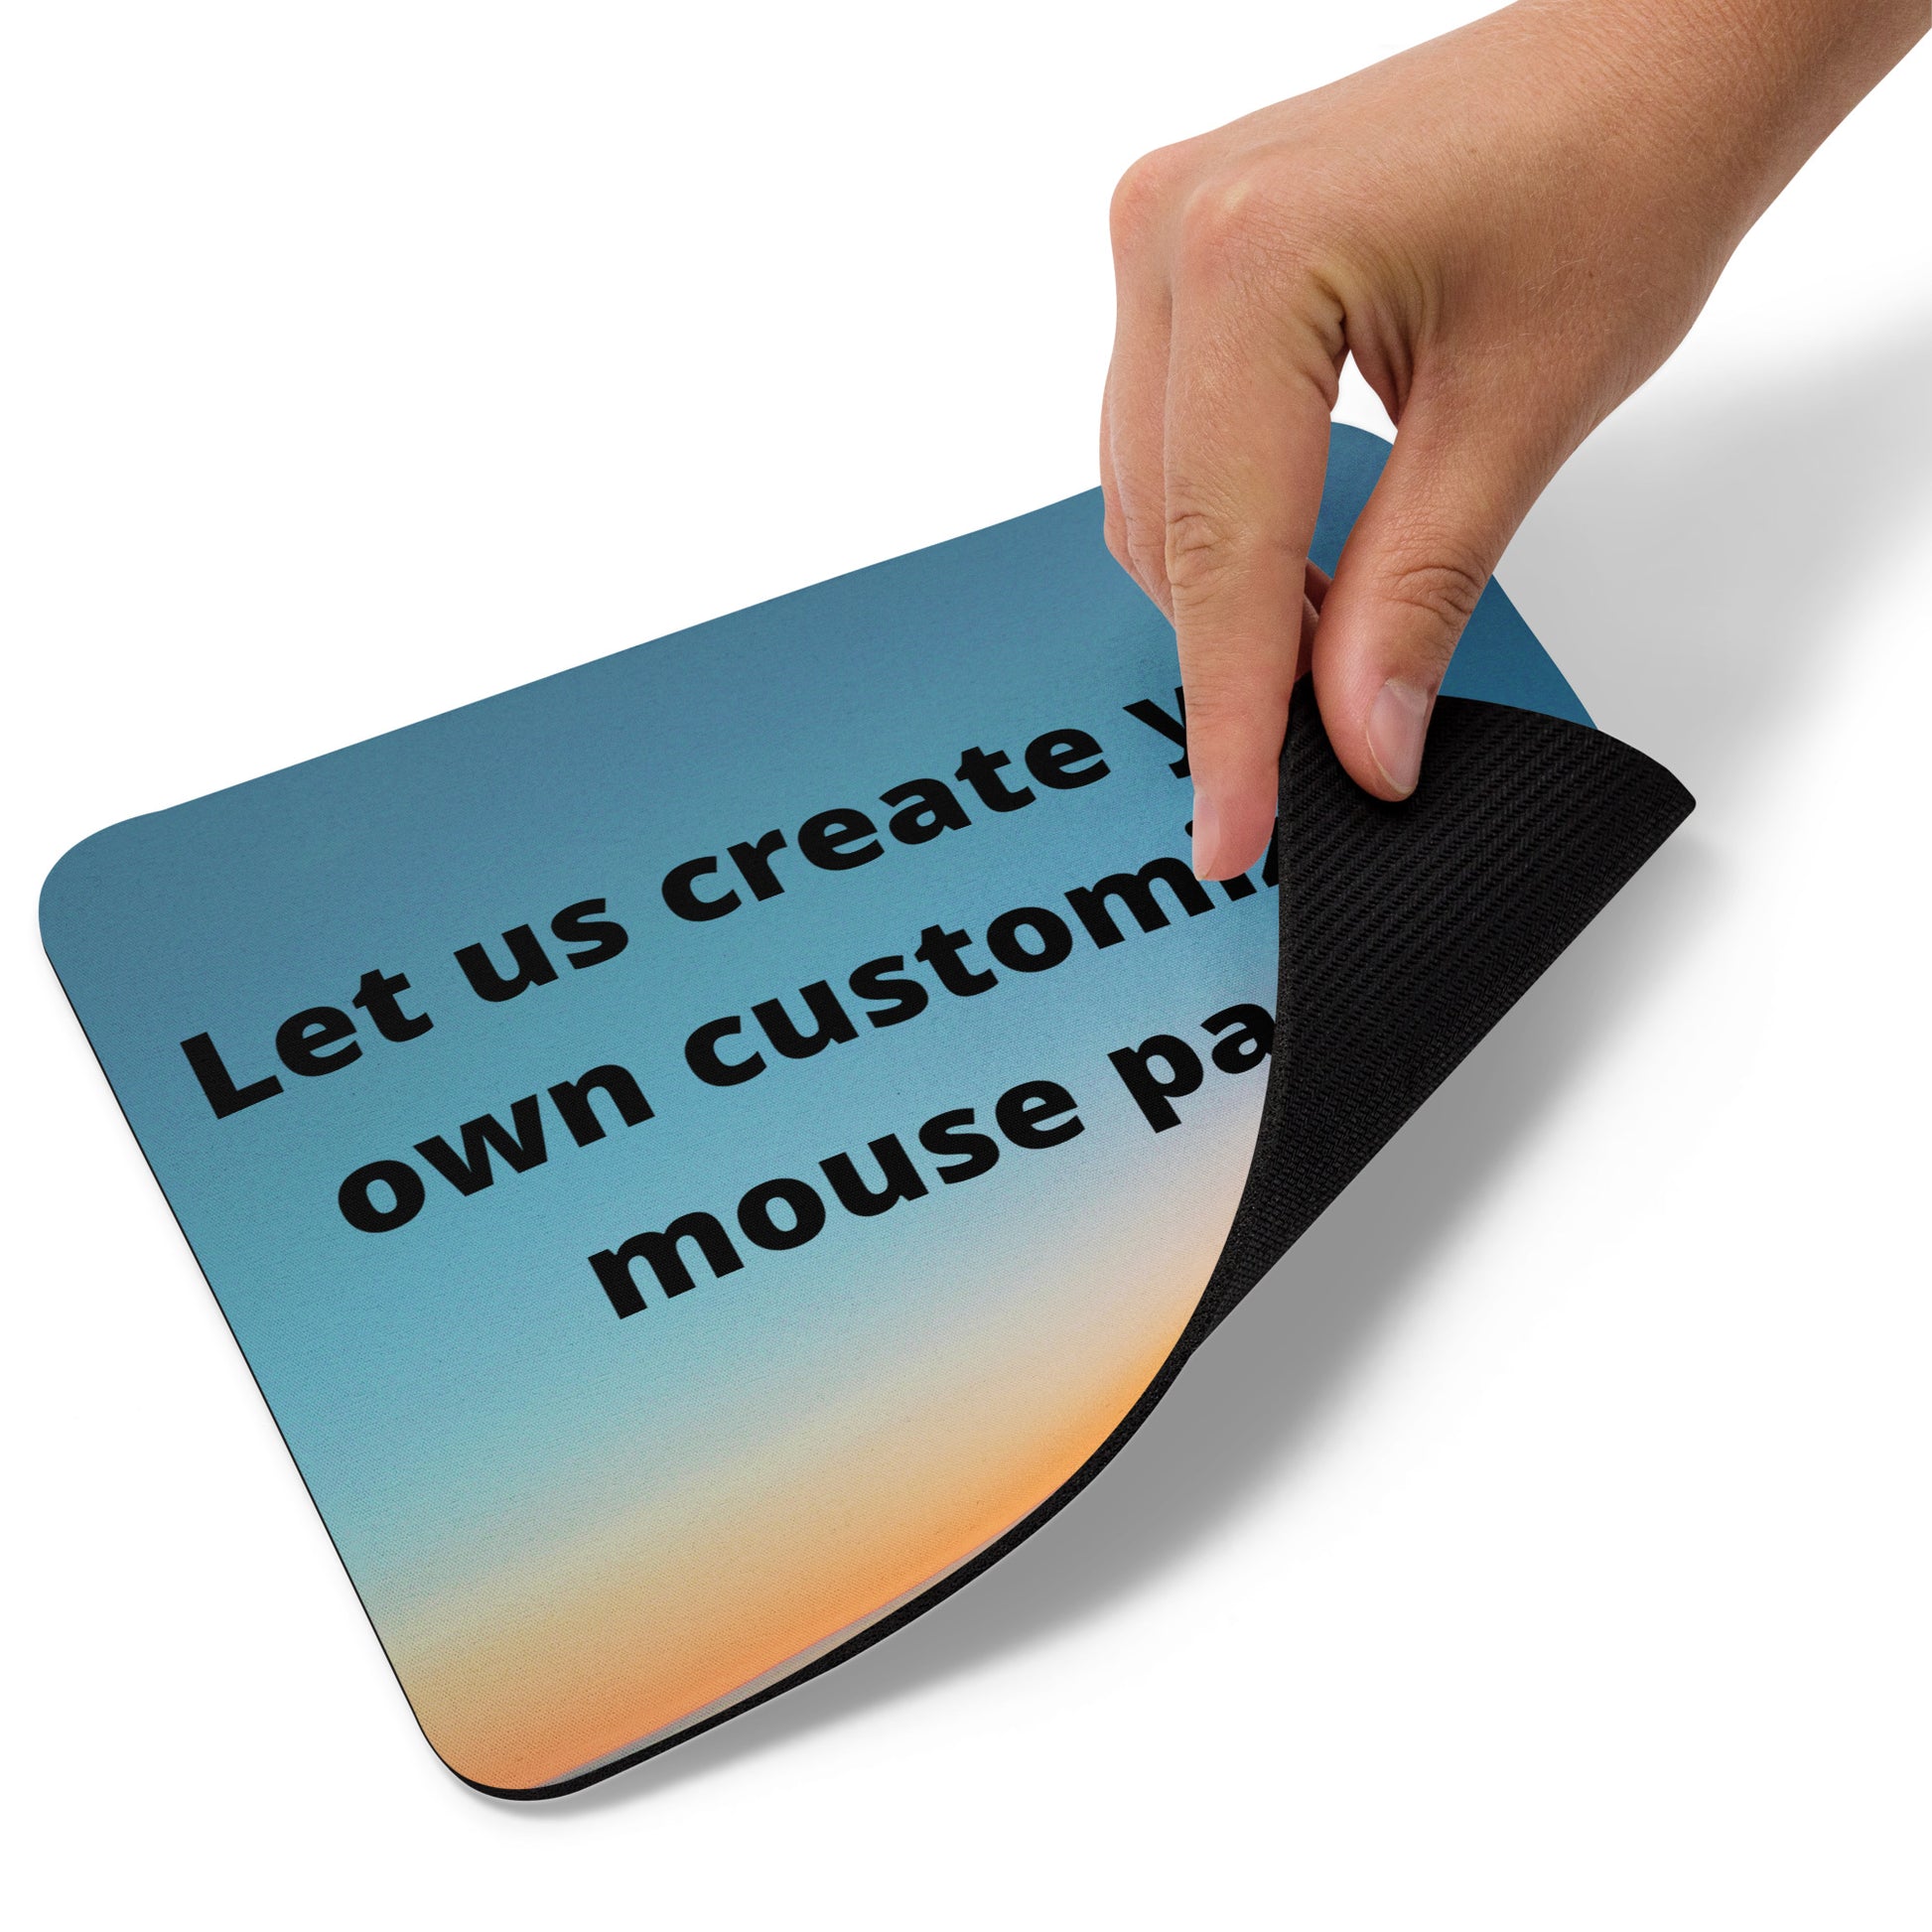 Your customized Mouse pad - Bob and Penny Lord